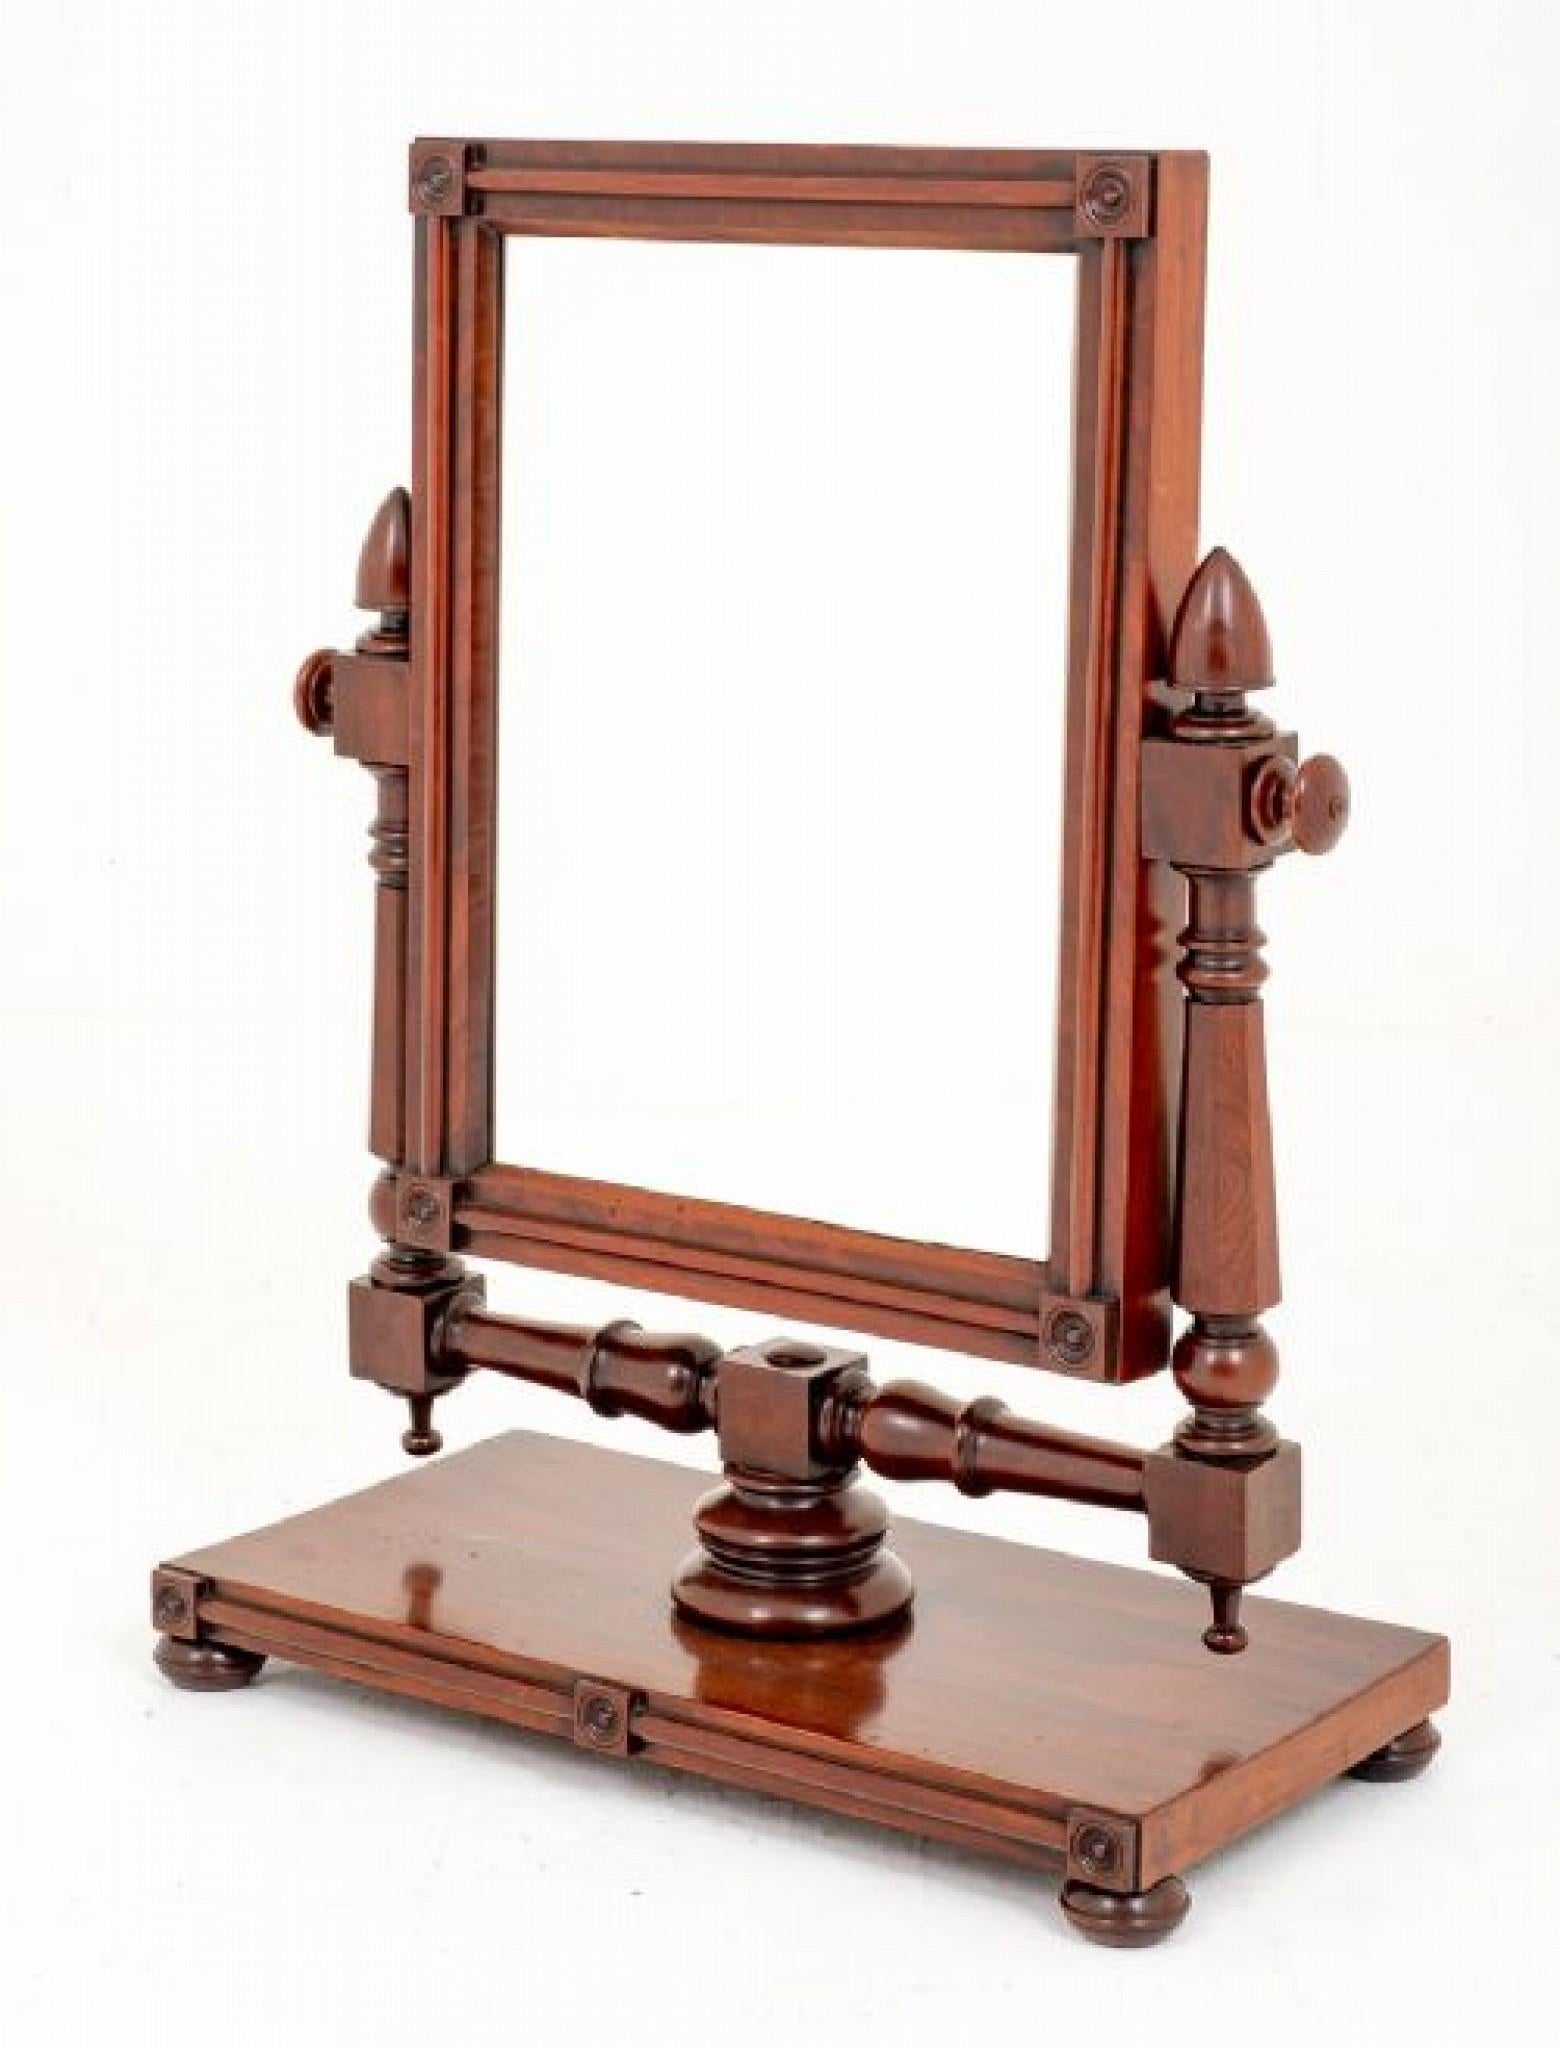 Good William IV mahogany swing mirror.
19th Century
having turned bun feet and applied roundrells to the base.
Featuring a ring turned sockel and ring turned supports.
The mirror frame having ring turned roundrells to the corners.
The mirror is